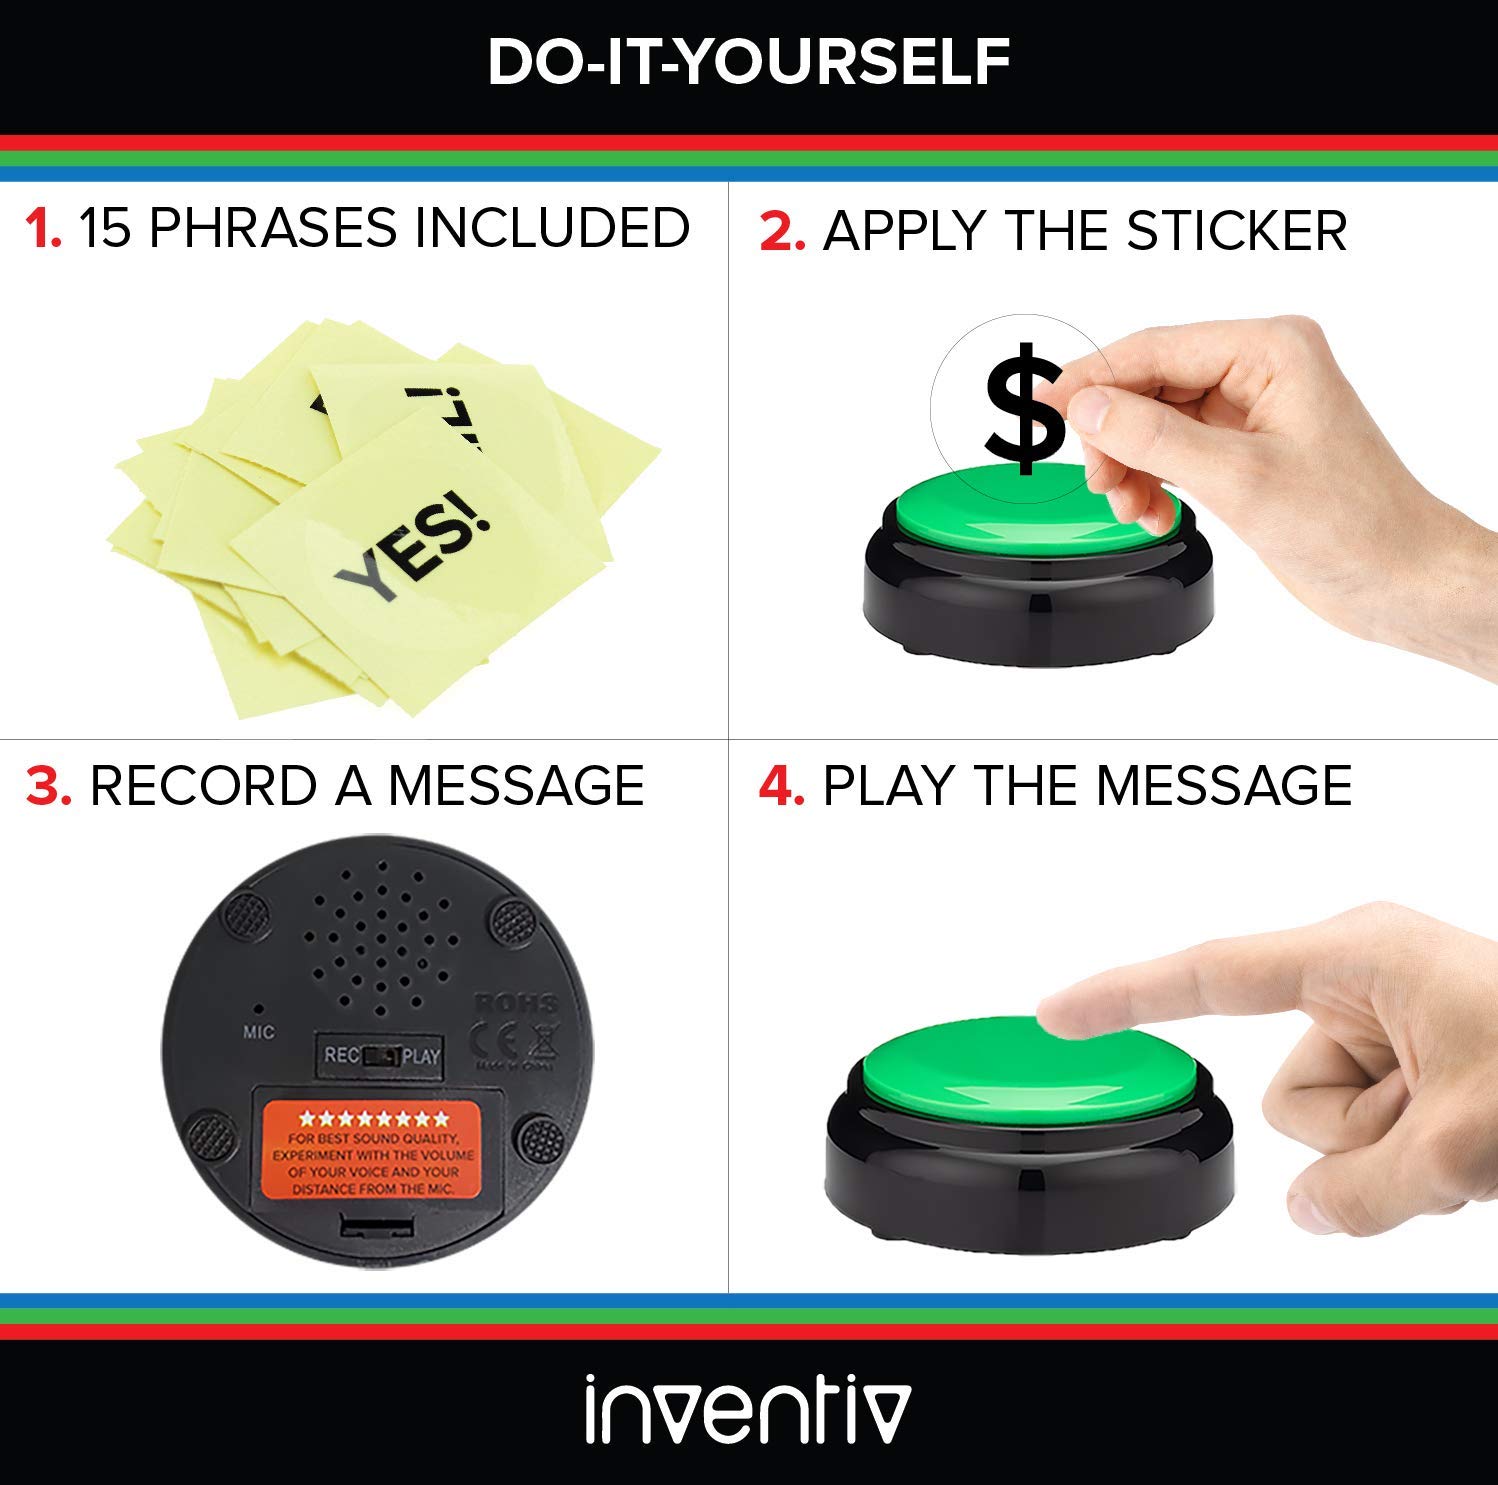 Inventiv 30 Second Custom Recordable Talking Button, Record & Playback Your Own Message, Quality Voice Sound Recorder - 15 Phrase Stickers Included (Green)